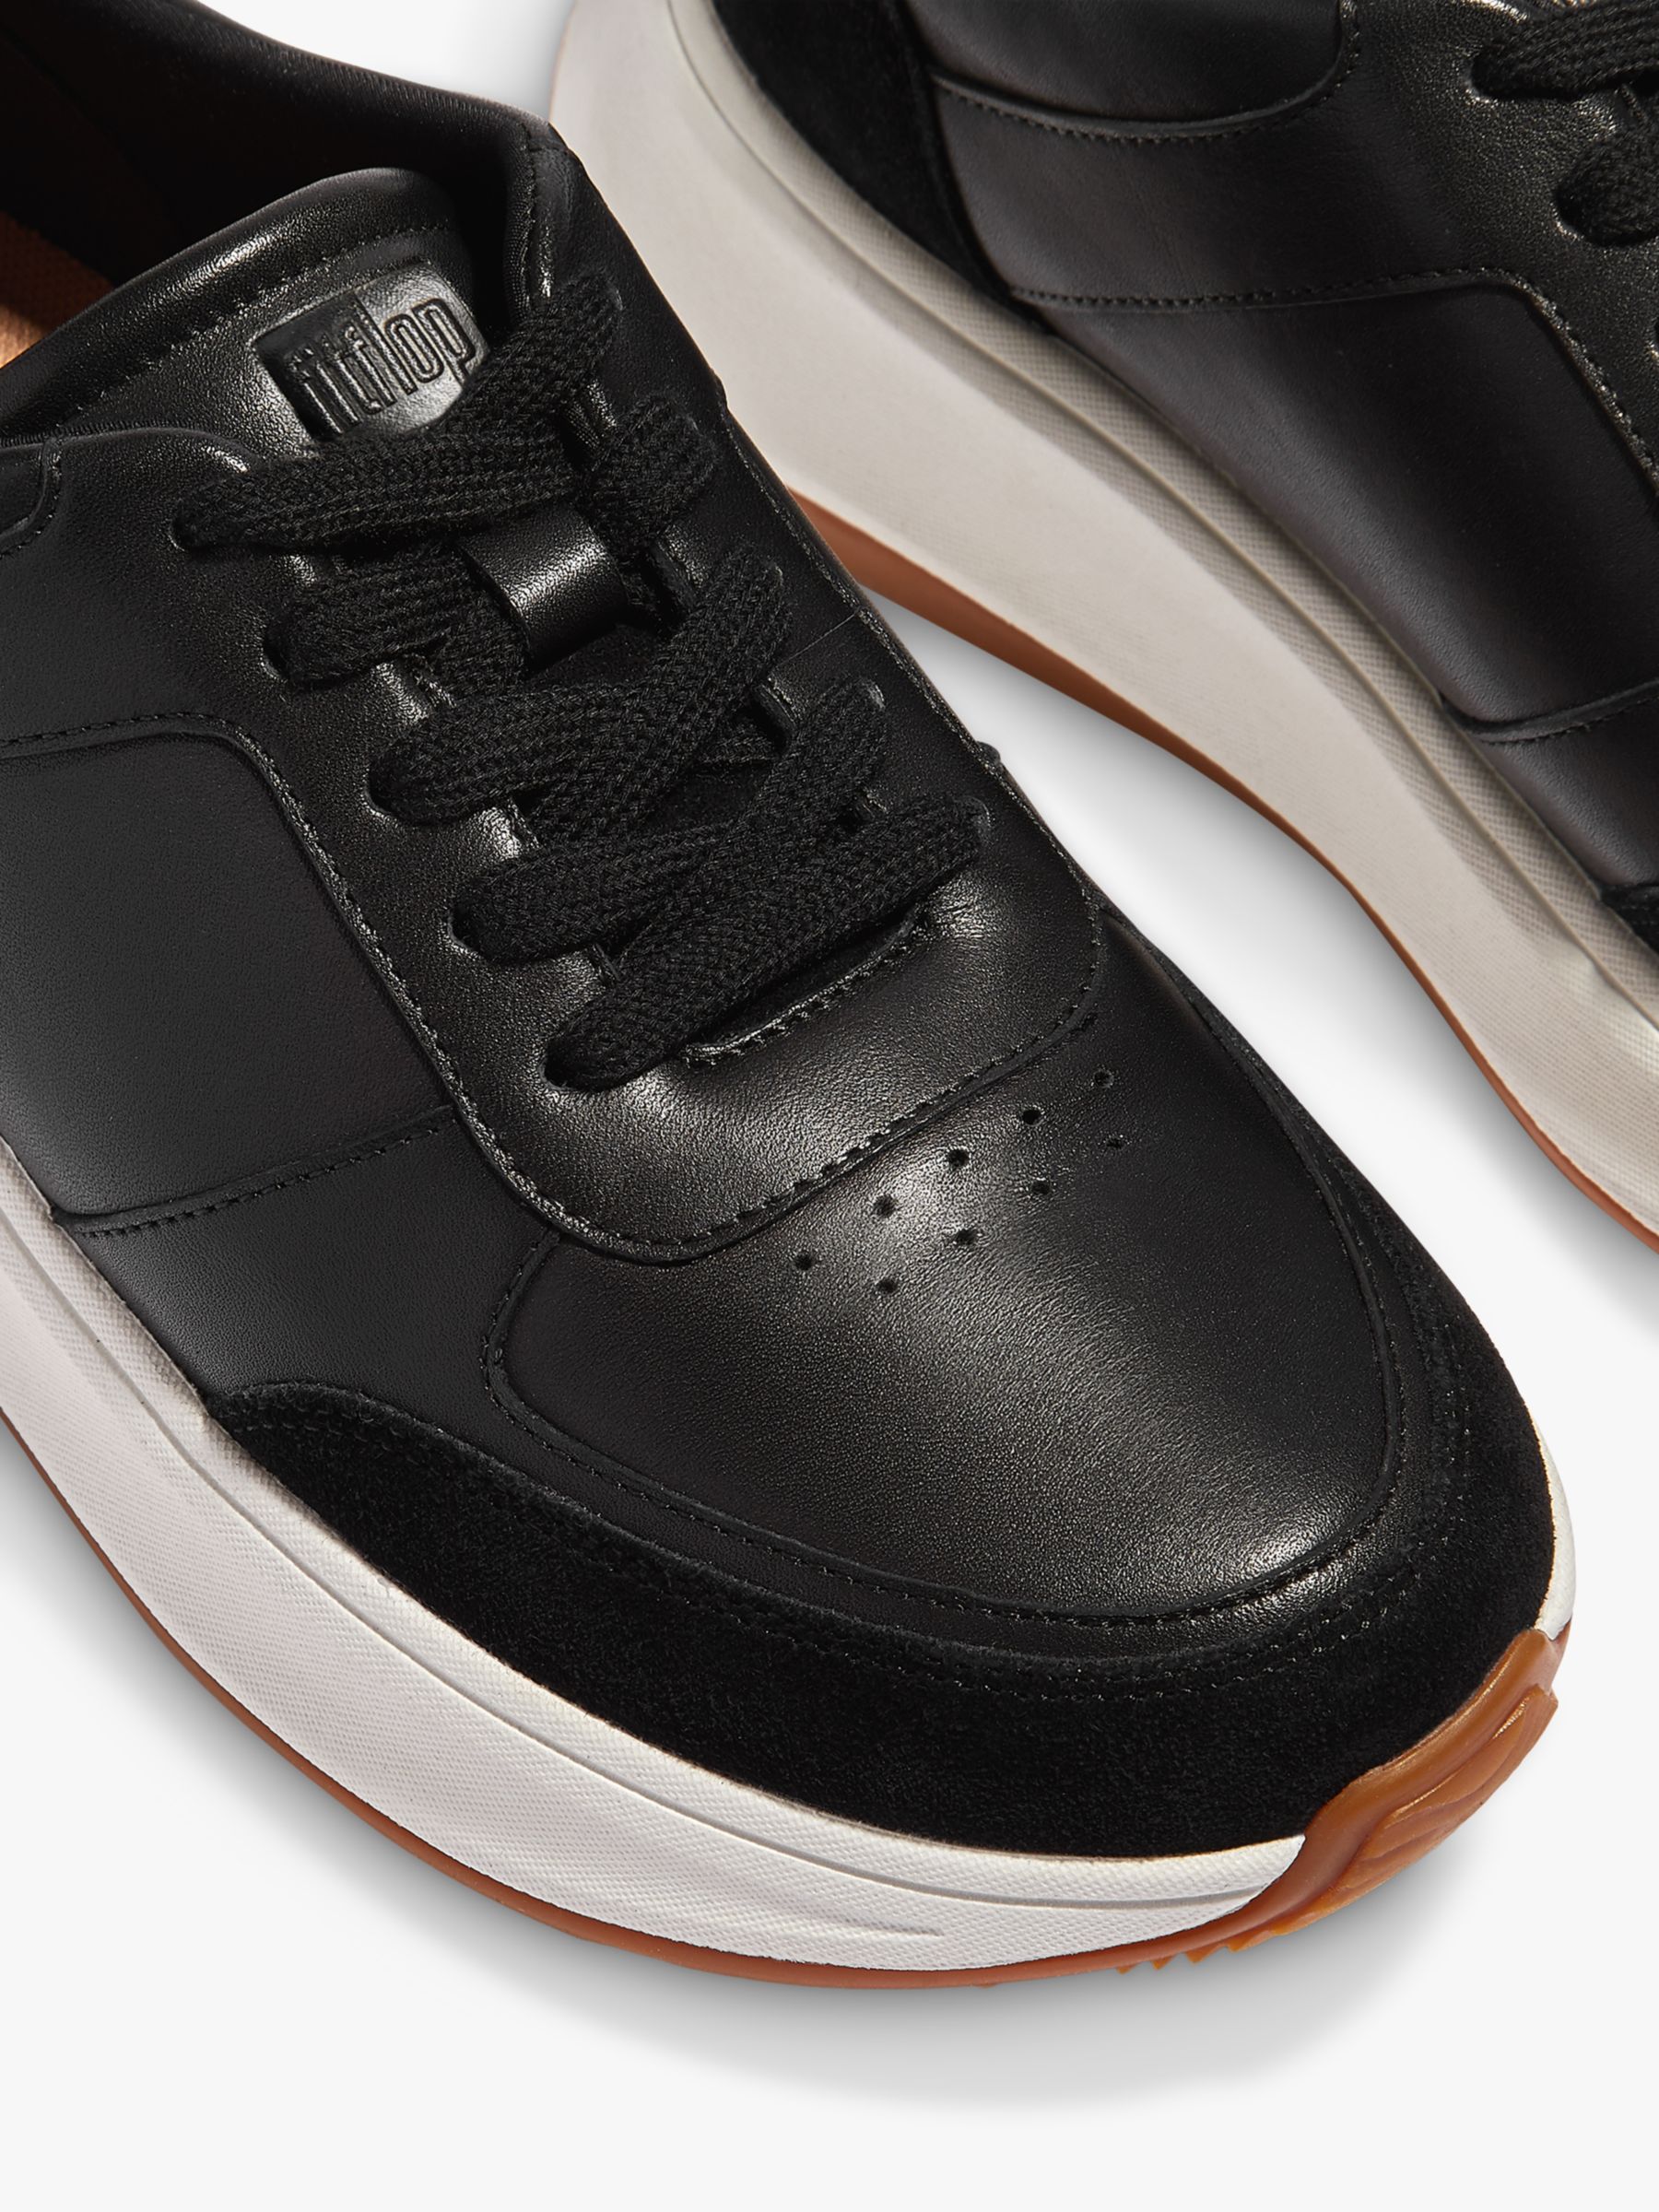 FitFlop Stacked Leather Trainers, Black at John Lewis & Partners